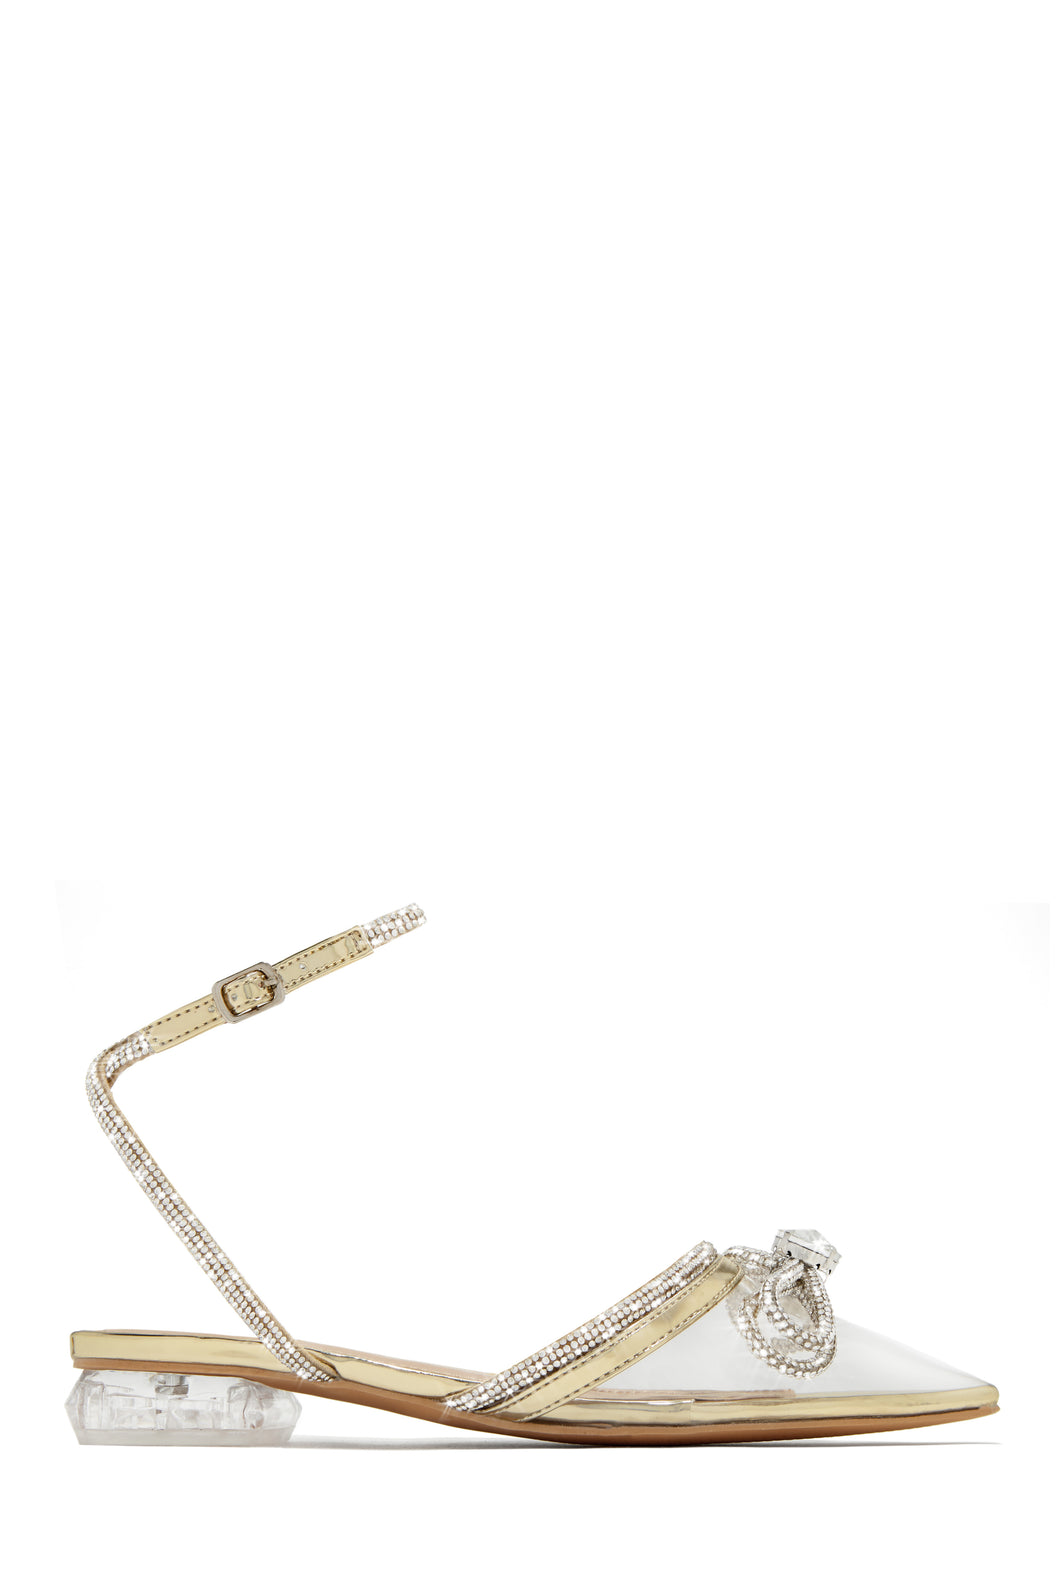 The Afterparty Embellished Pointed Toe Flats - Gold